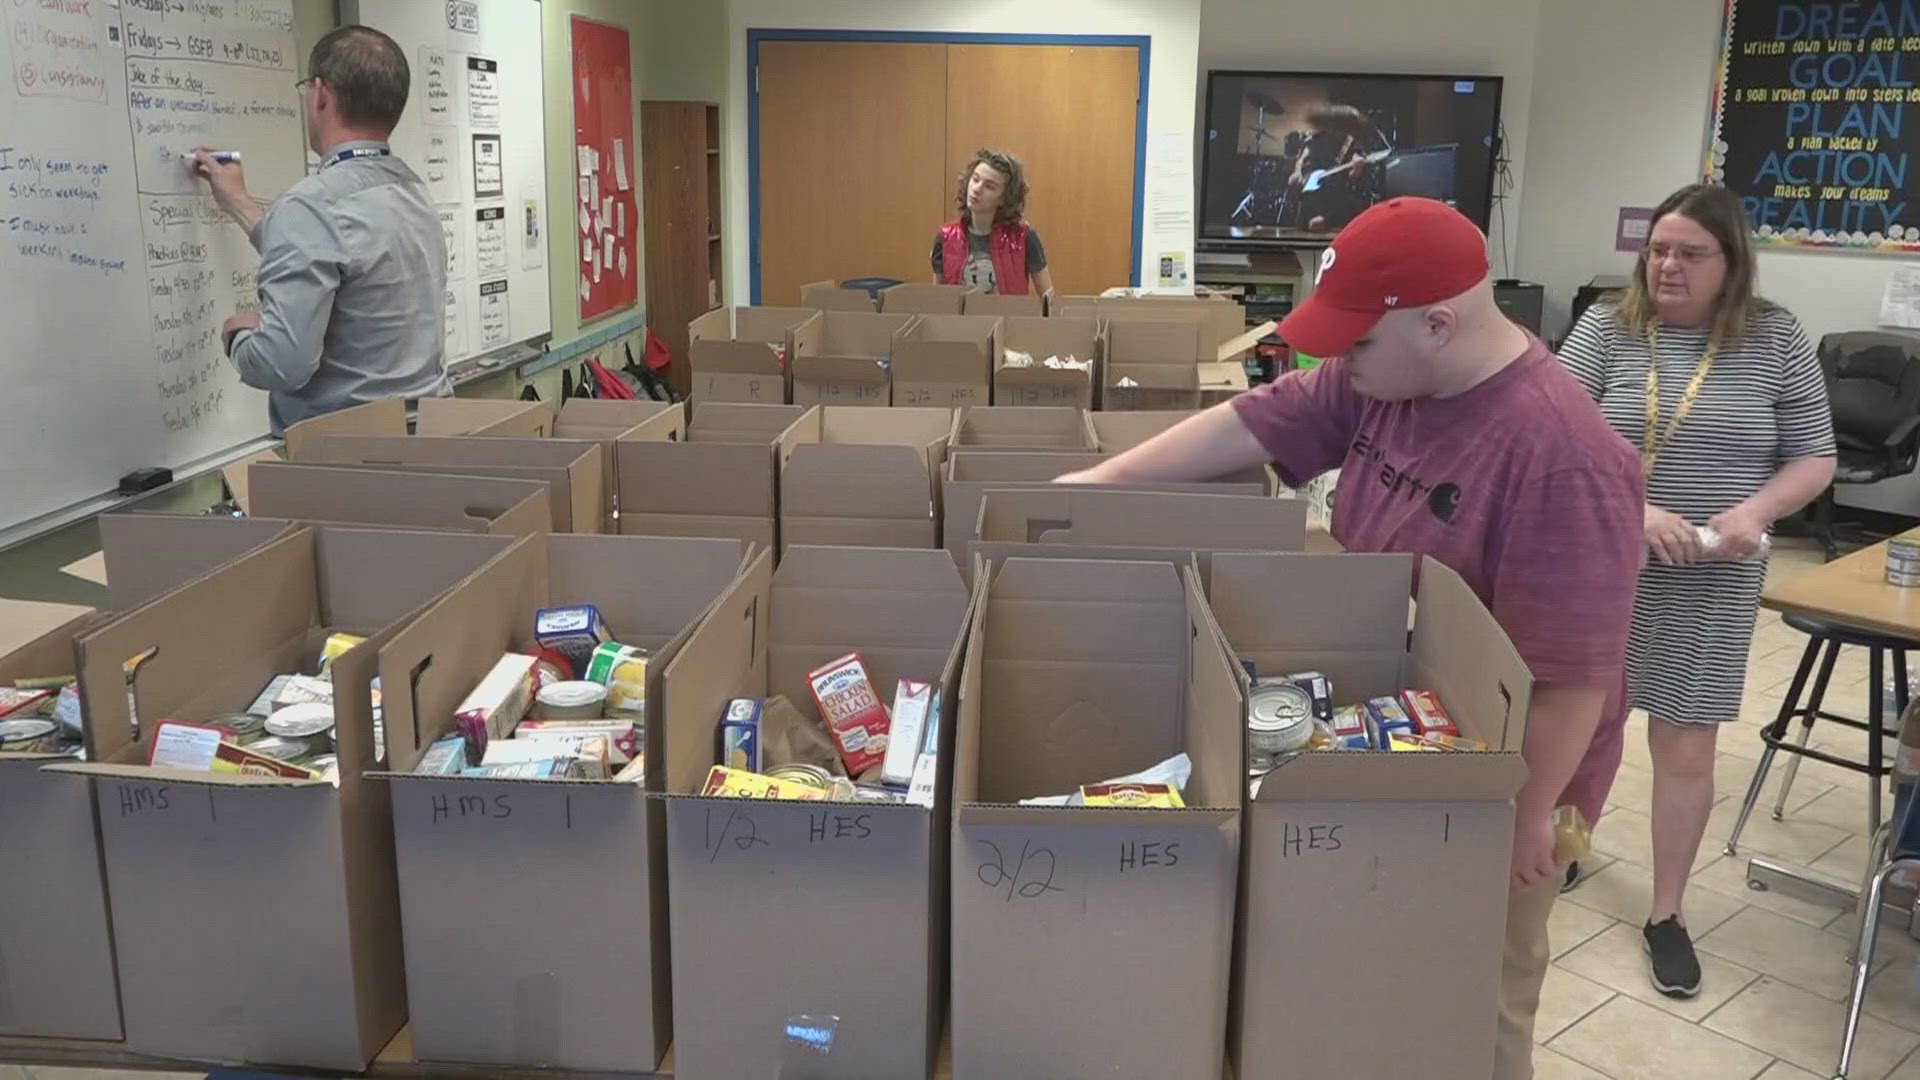 Students at the high school helped fill boxes from Good Shepherd Food Bank and would distribute about 30 of those boxes each week to families three local schools.